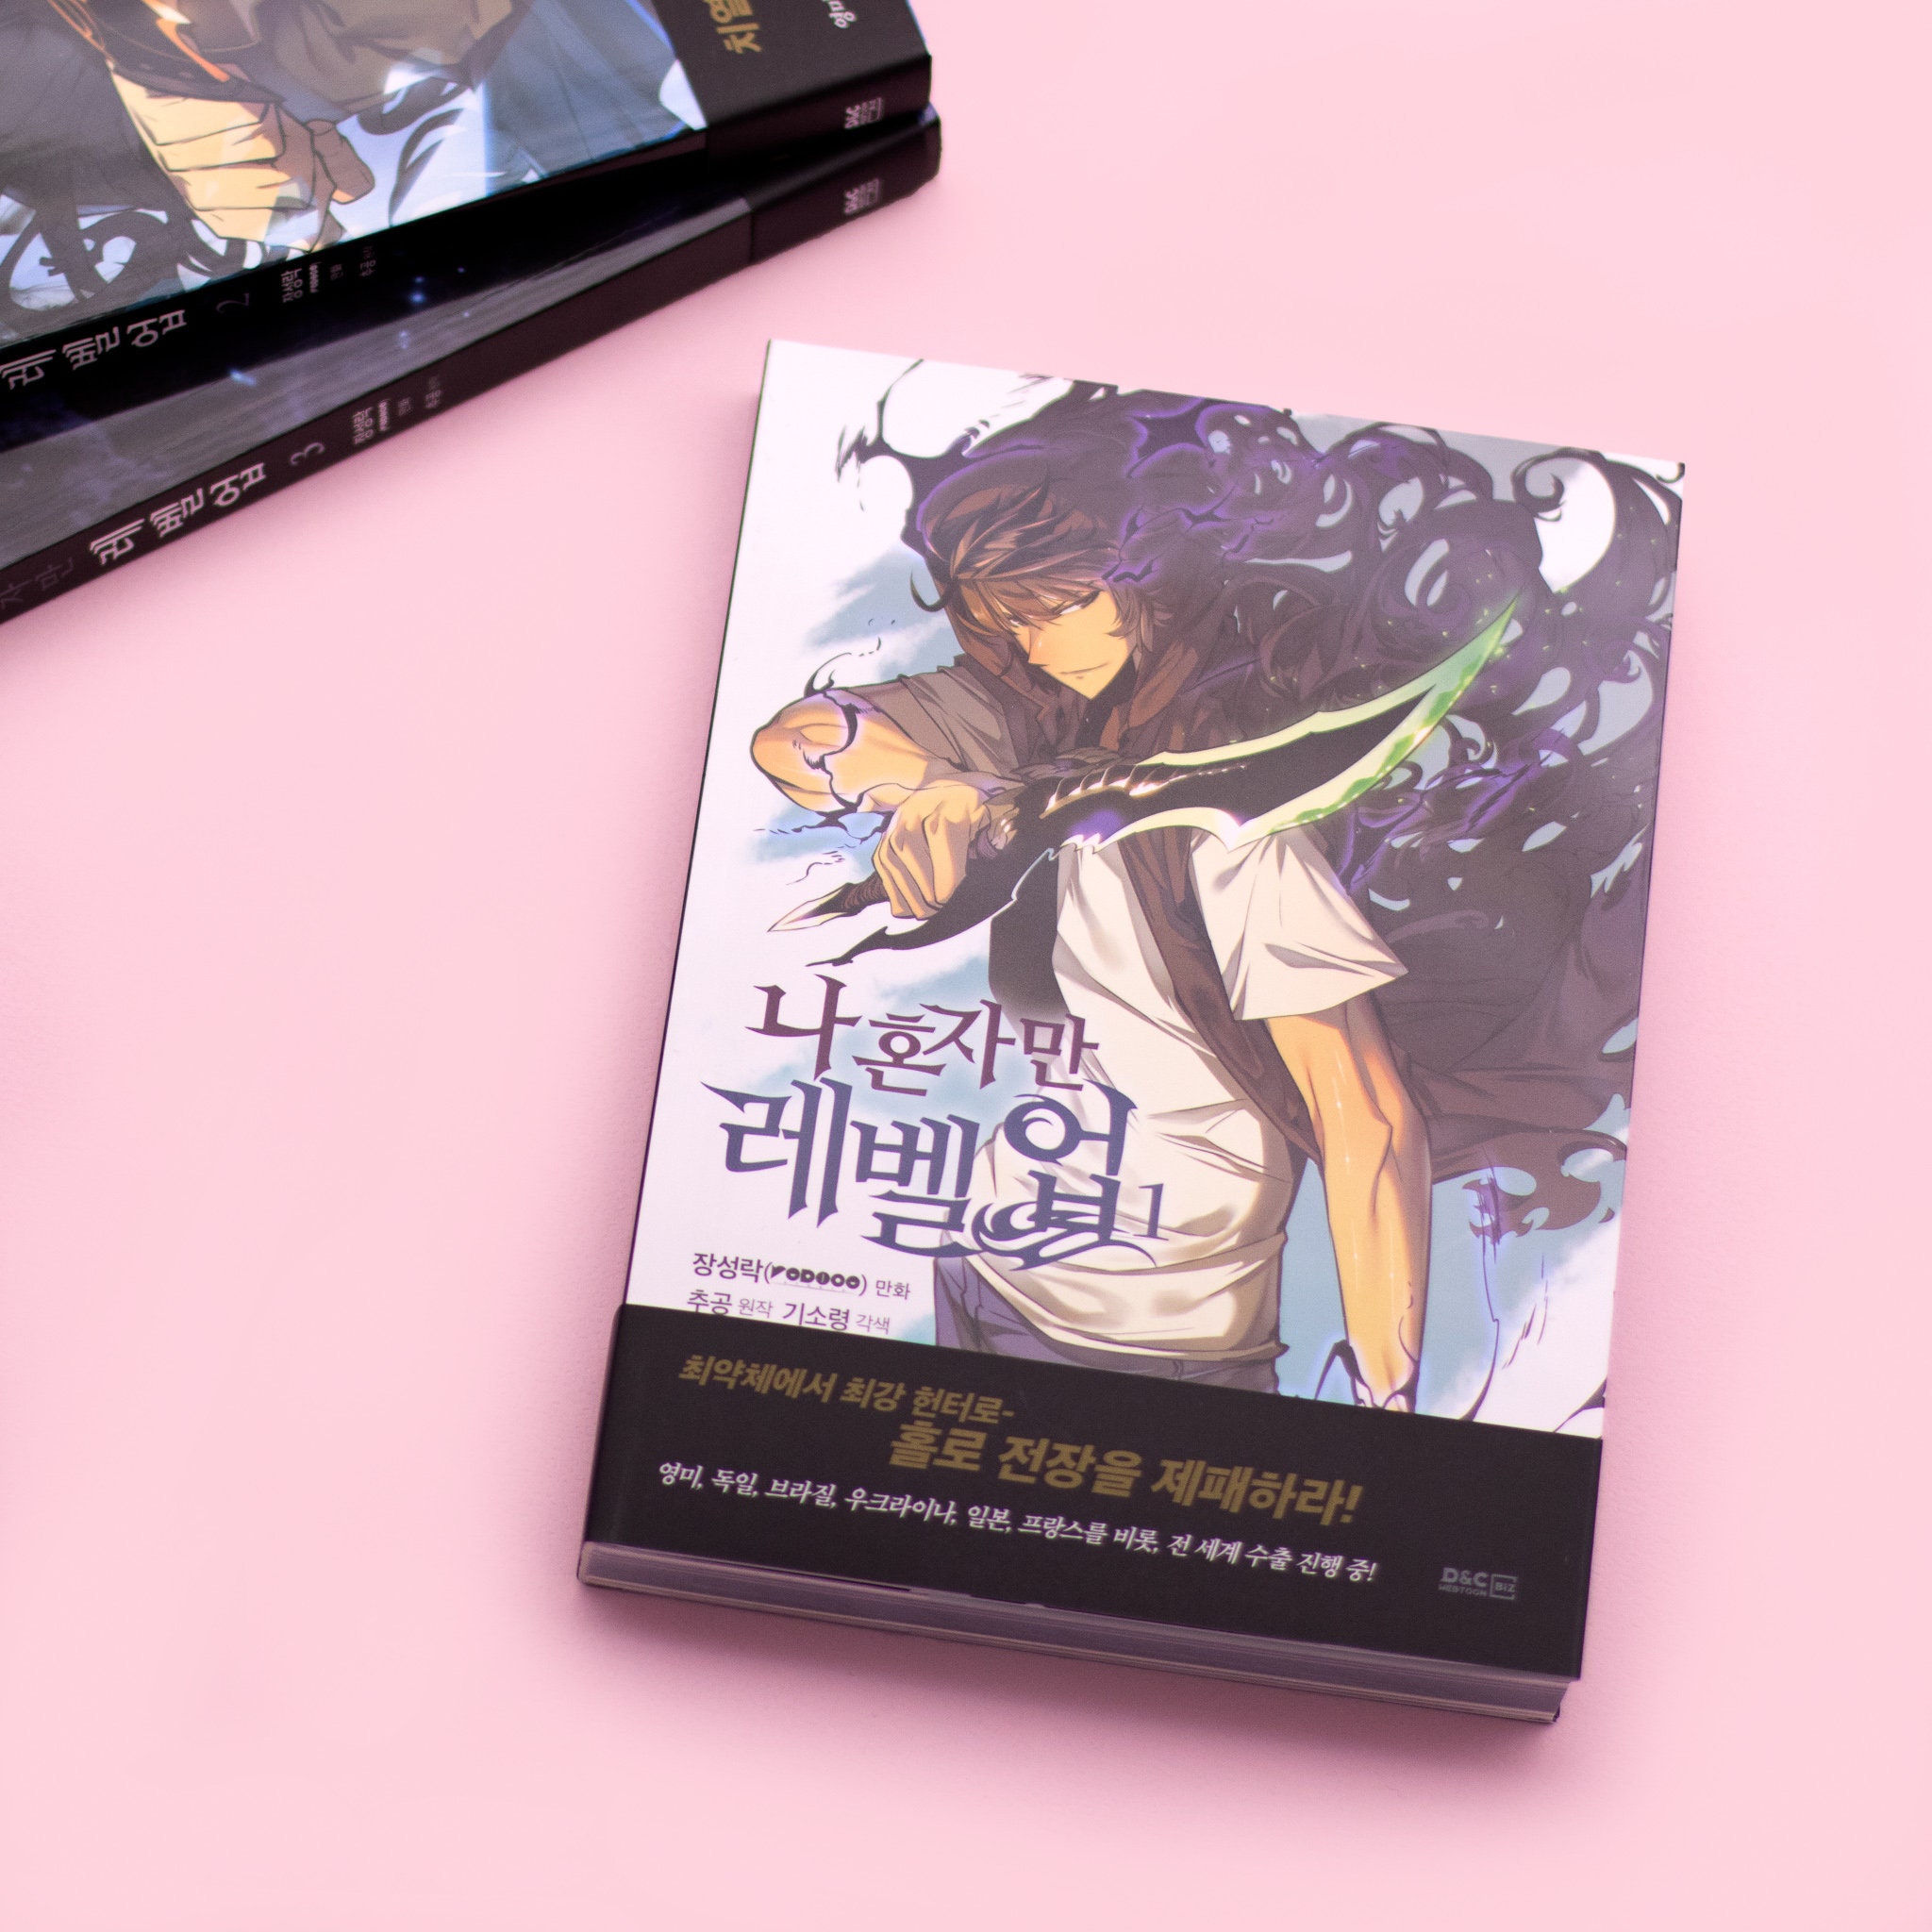 Solo Leveling manwha Vol 8 out next week – Jin Woo Sung